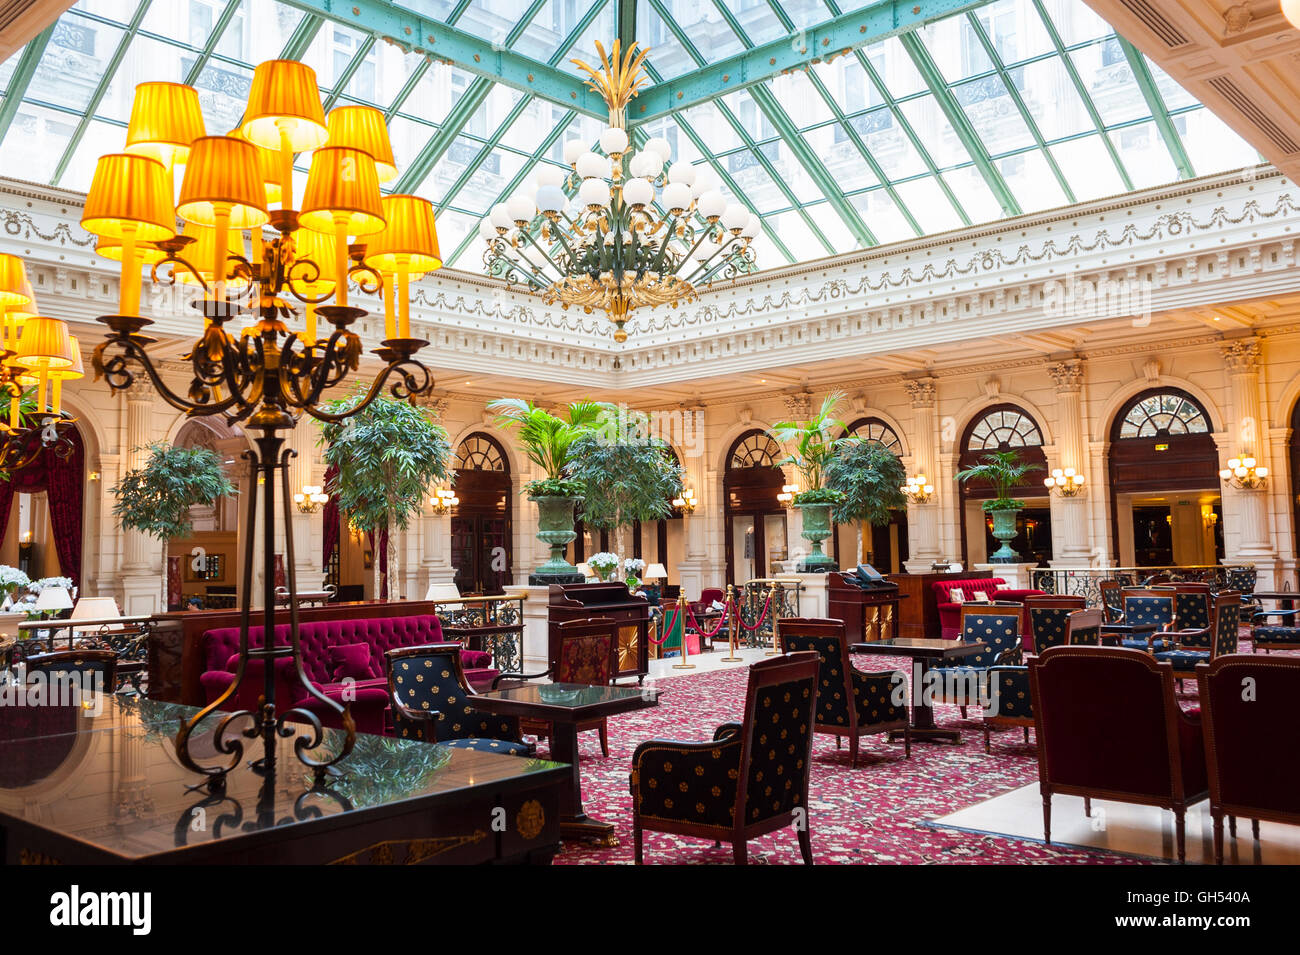 Paris, France, Interior, Bar, Cafe, Lounge Room with Skylight, 'InterContinental Paris Le Grand Hotel'. Ornate Decor with Chandelier, contemporary interiors, Luxury, interior cafe paris Stock Photo